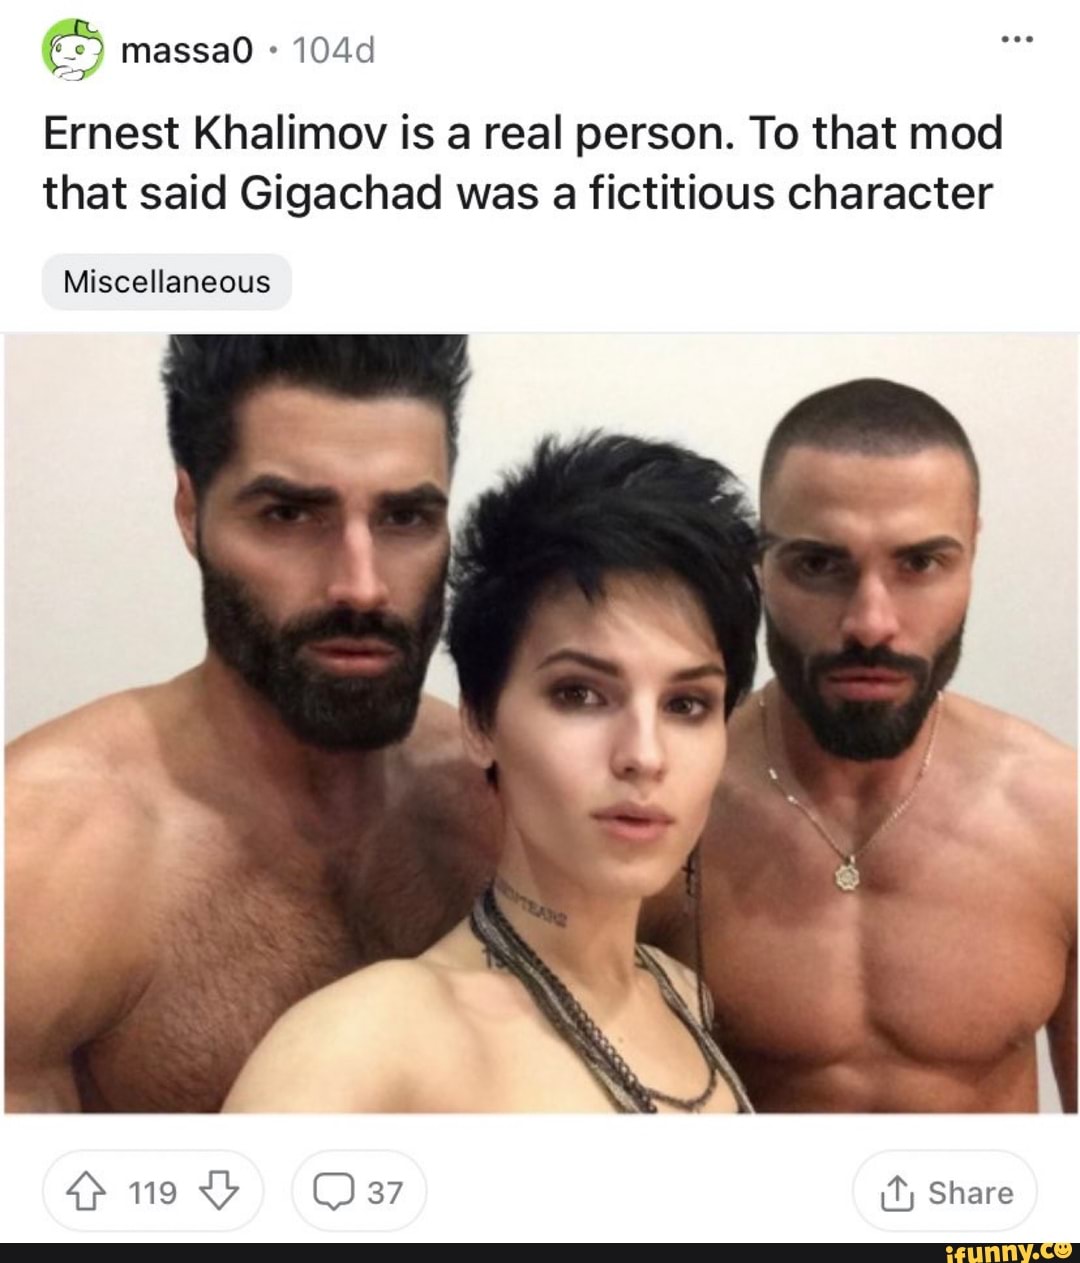 Ernest Khalimov is a real person. To that mod that said Gigachad was a fictitious character